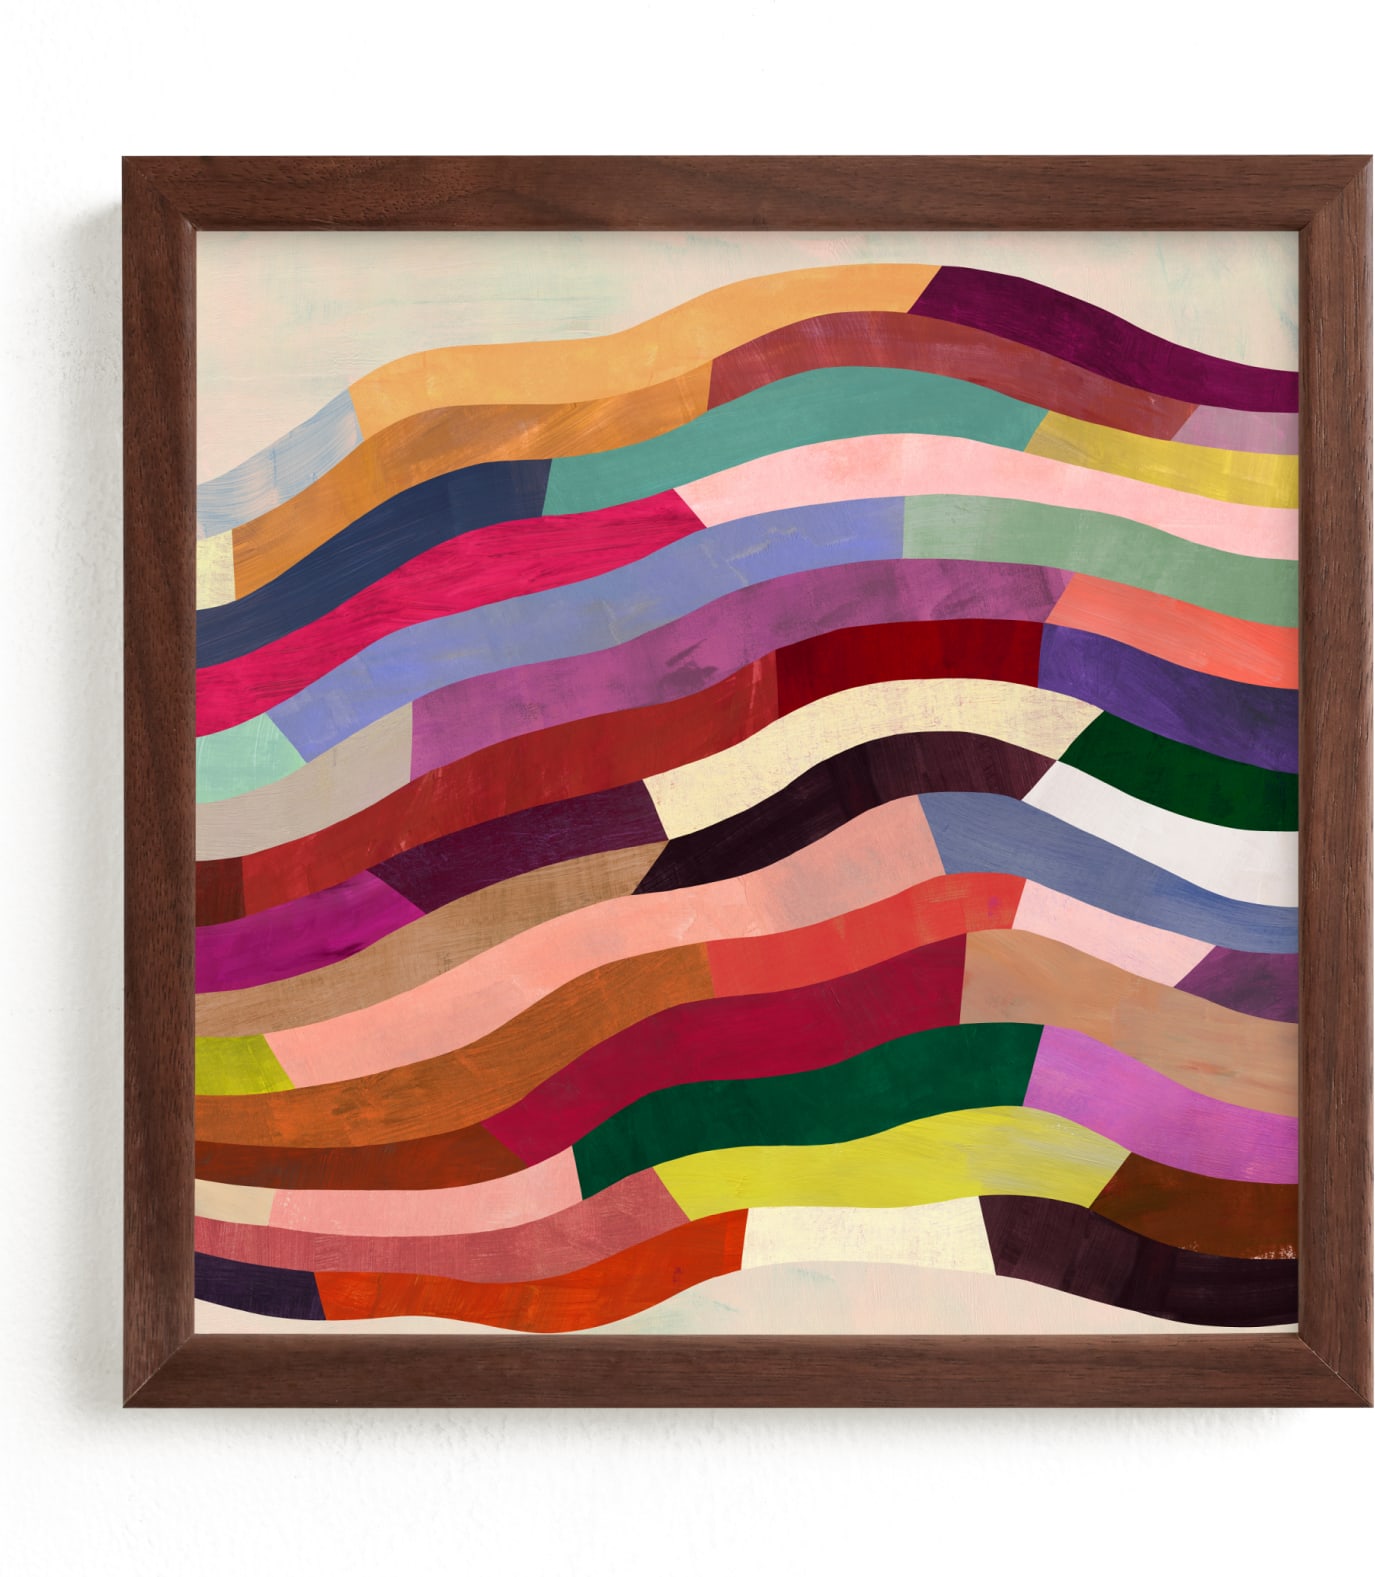 This is a ivory, colorful, pink art by melanie mikecz called Strata II.